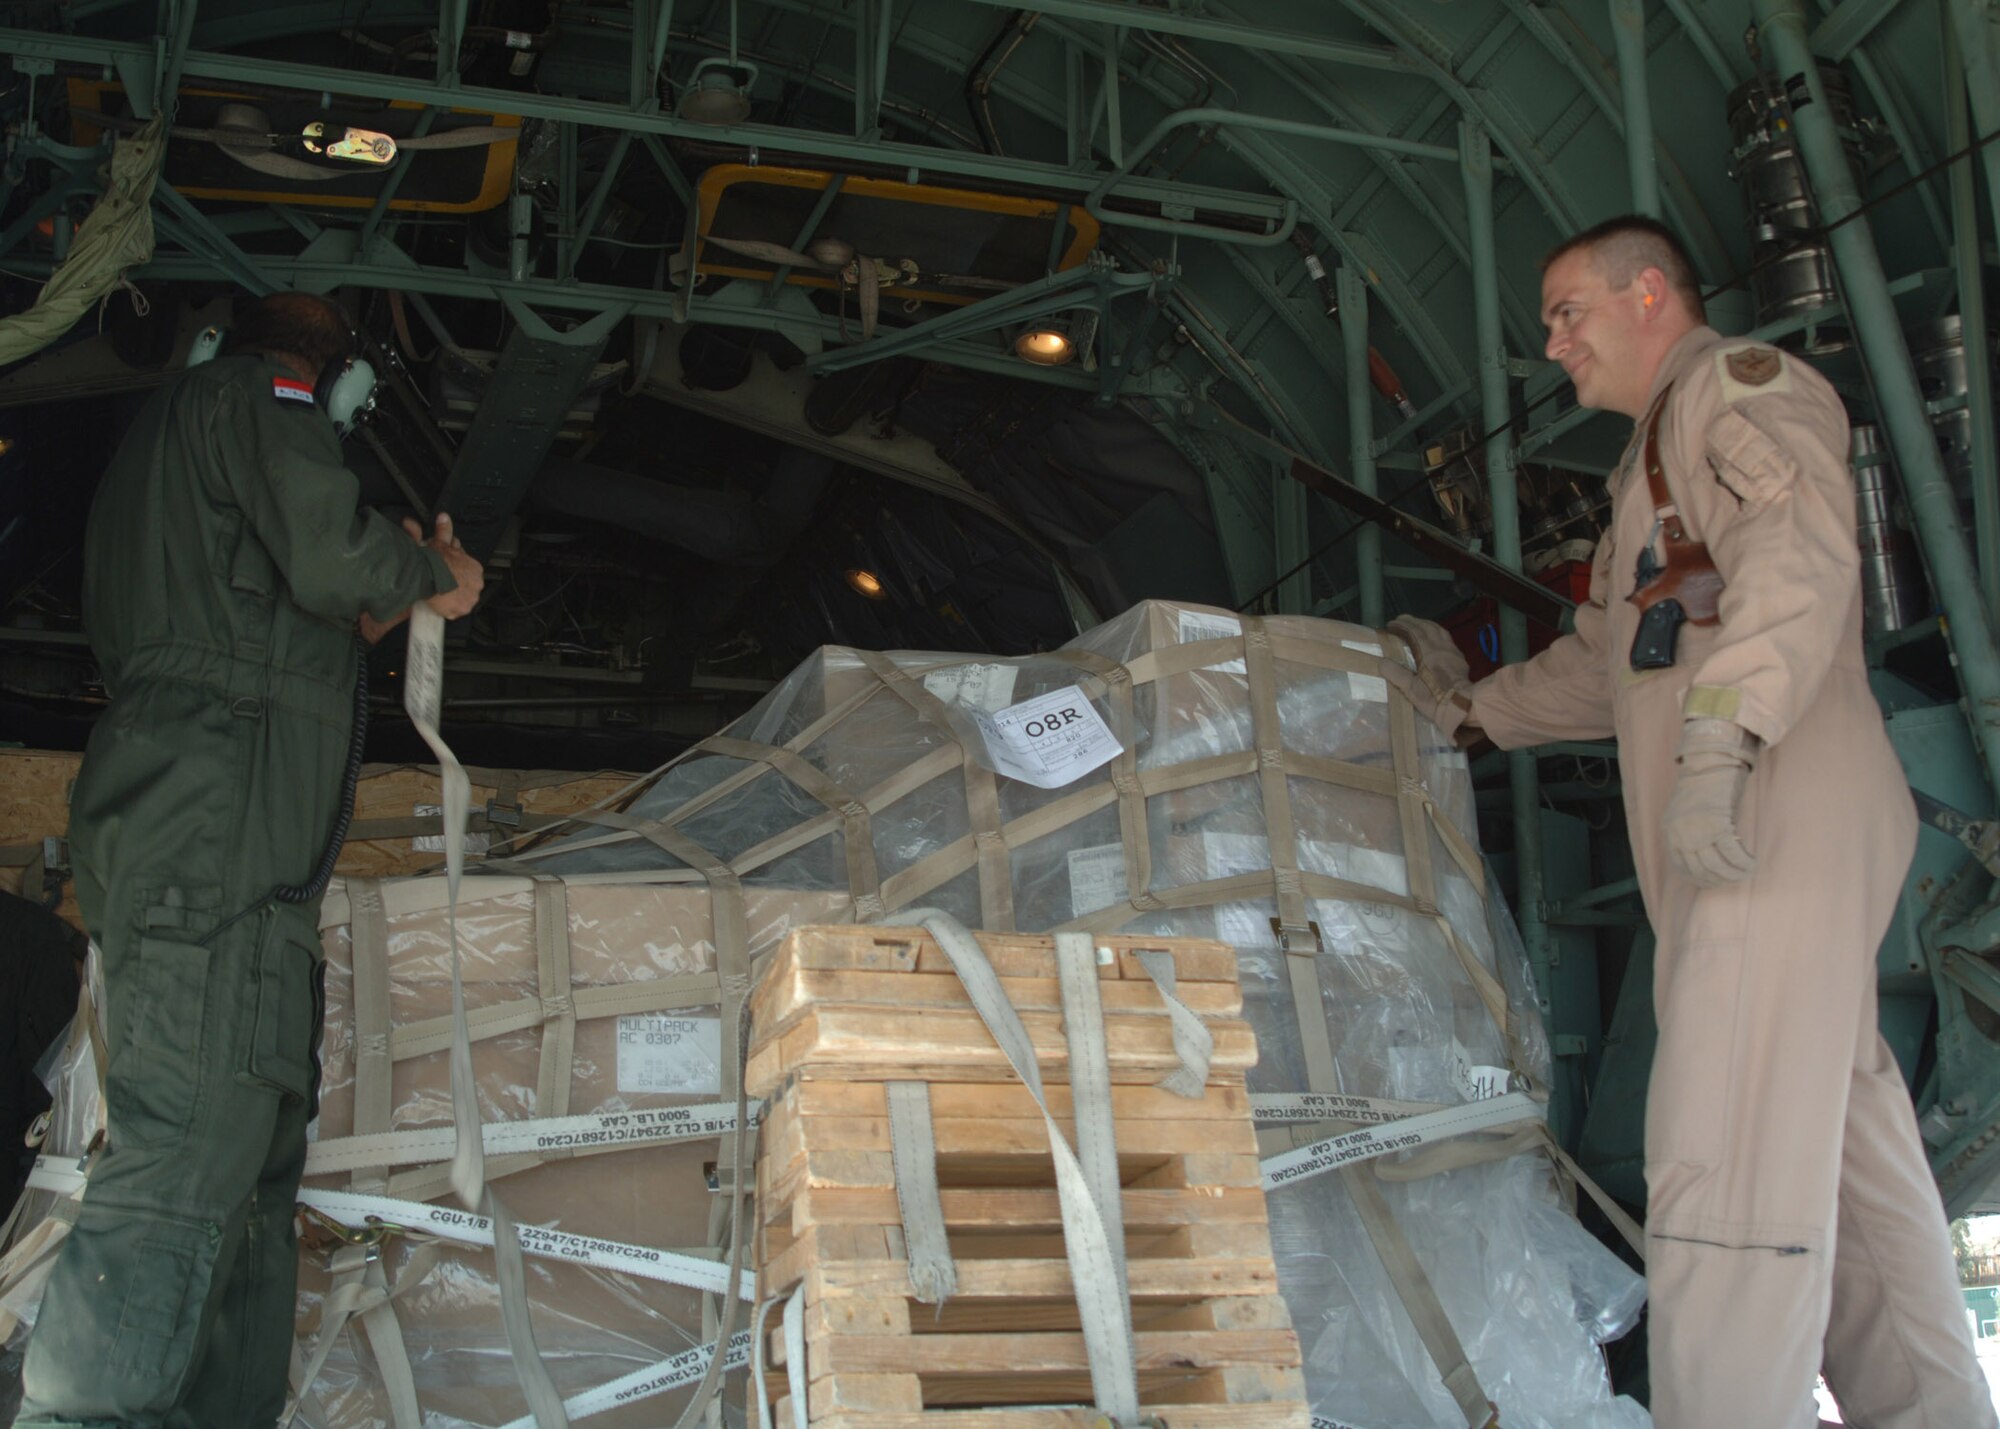 BALAD AIR BASE, Iraq - An Iraqi Air Force crew member and U.S. Air Force Master Sgt. John Gahan, who serves with the Coalition Air Force Transition Team, secure pallets of humanitarian relief supplies for delivery to Iraqi citizens victimized in a suicide vehicle-borne improvised explosive device attack March 27 that killed 80 Iraqis, wounded 140 more, and destroyed more than 20 homes. The supplies, including food, tents and other humanitarian relief supplies, are being flown to Tal Afar on an Iraqi Air Force C-130 Hercules today. (U.S. Air Force photo/Capt. Ken Hall)